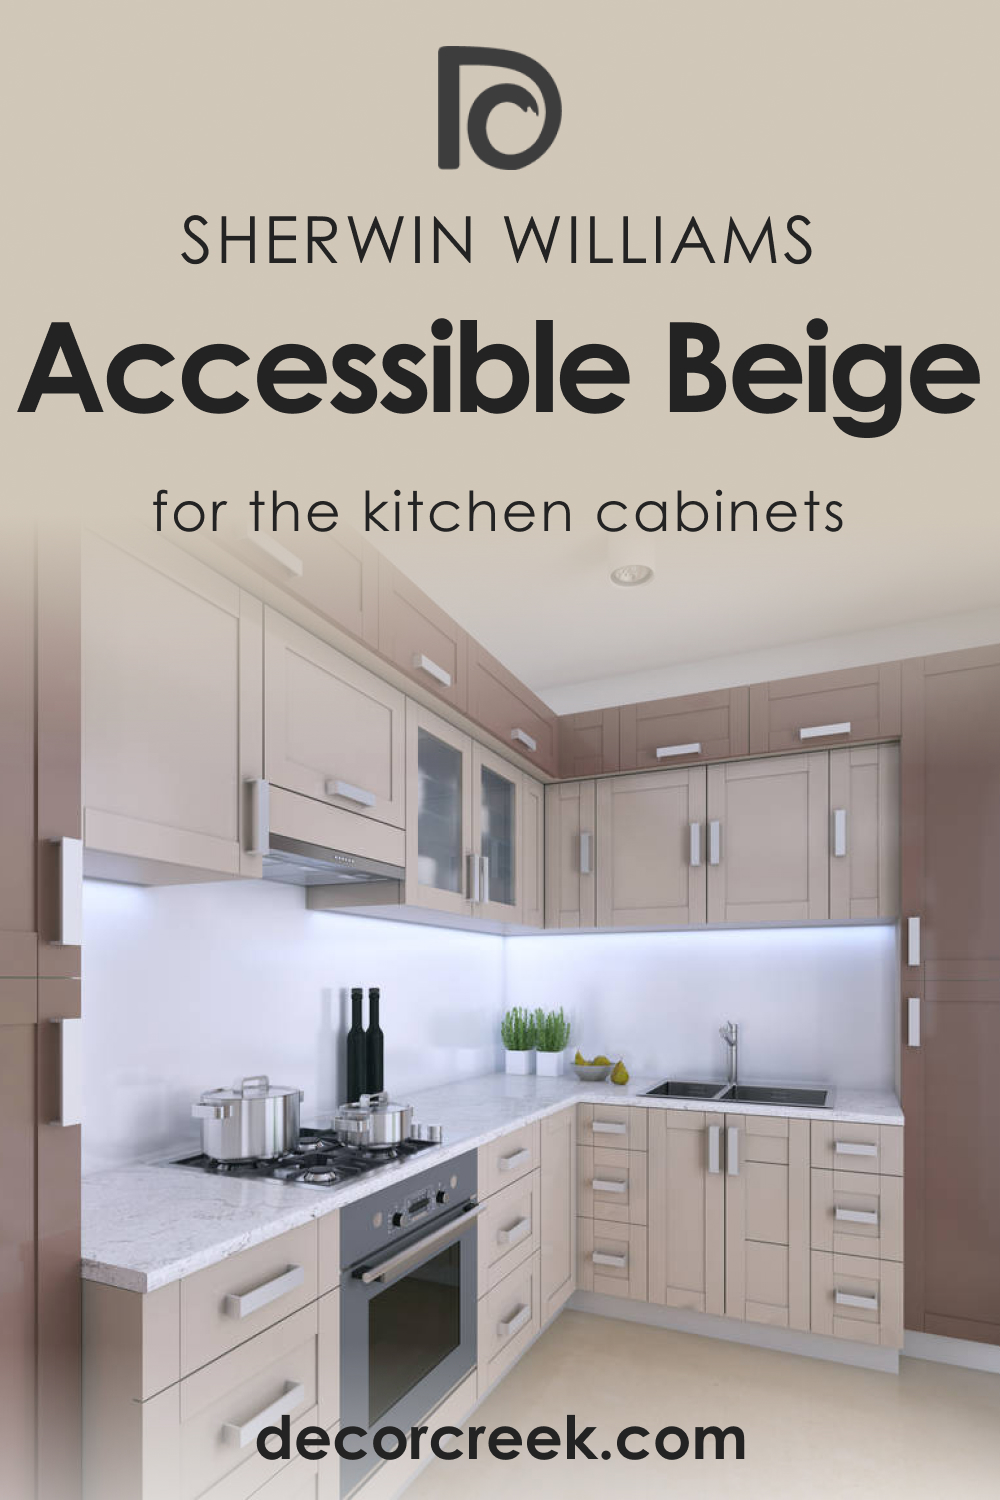 How to Use Accessible Beige SW 7036 for the Kitchen Cabinets?